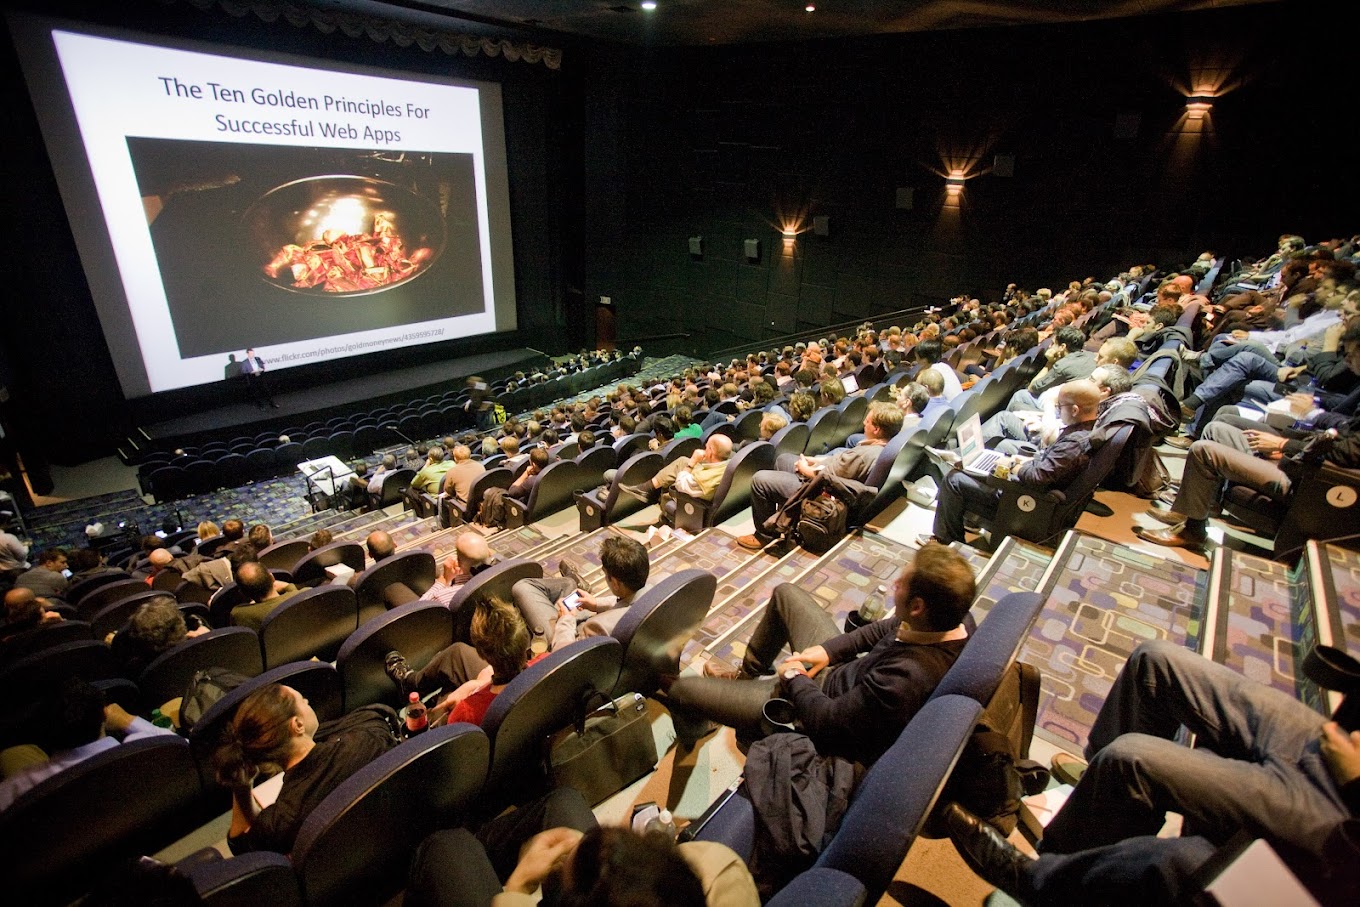 By 2010, some Democamp events were hosted in packed movie theaters